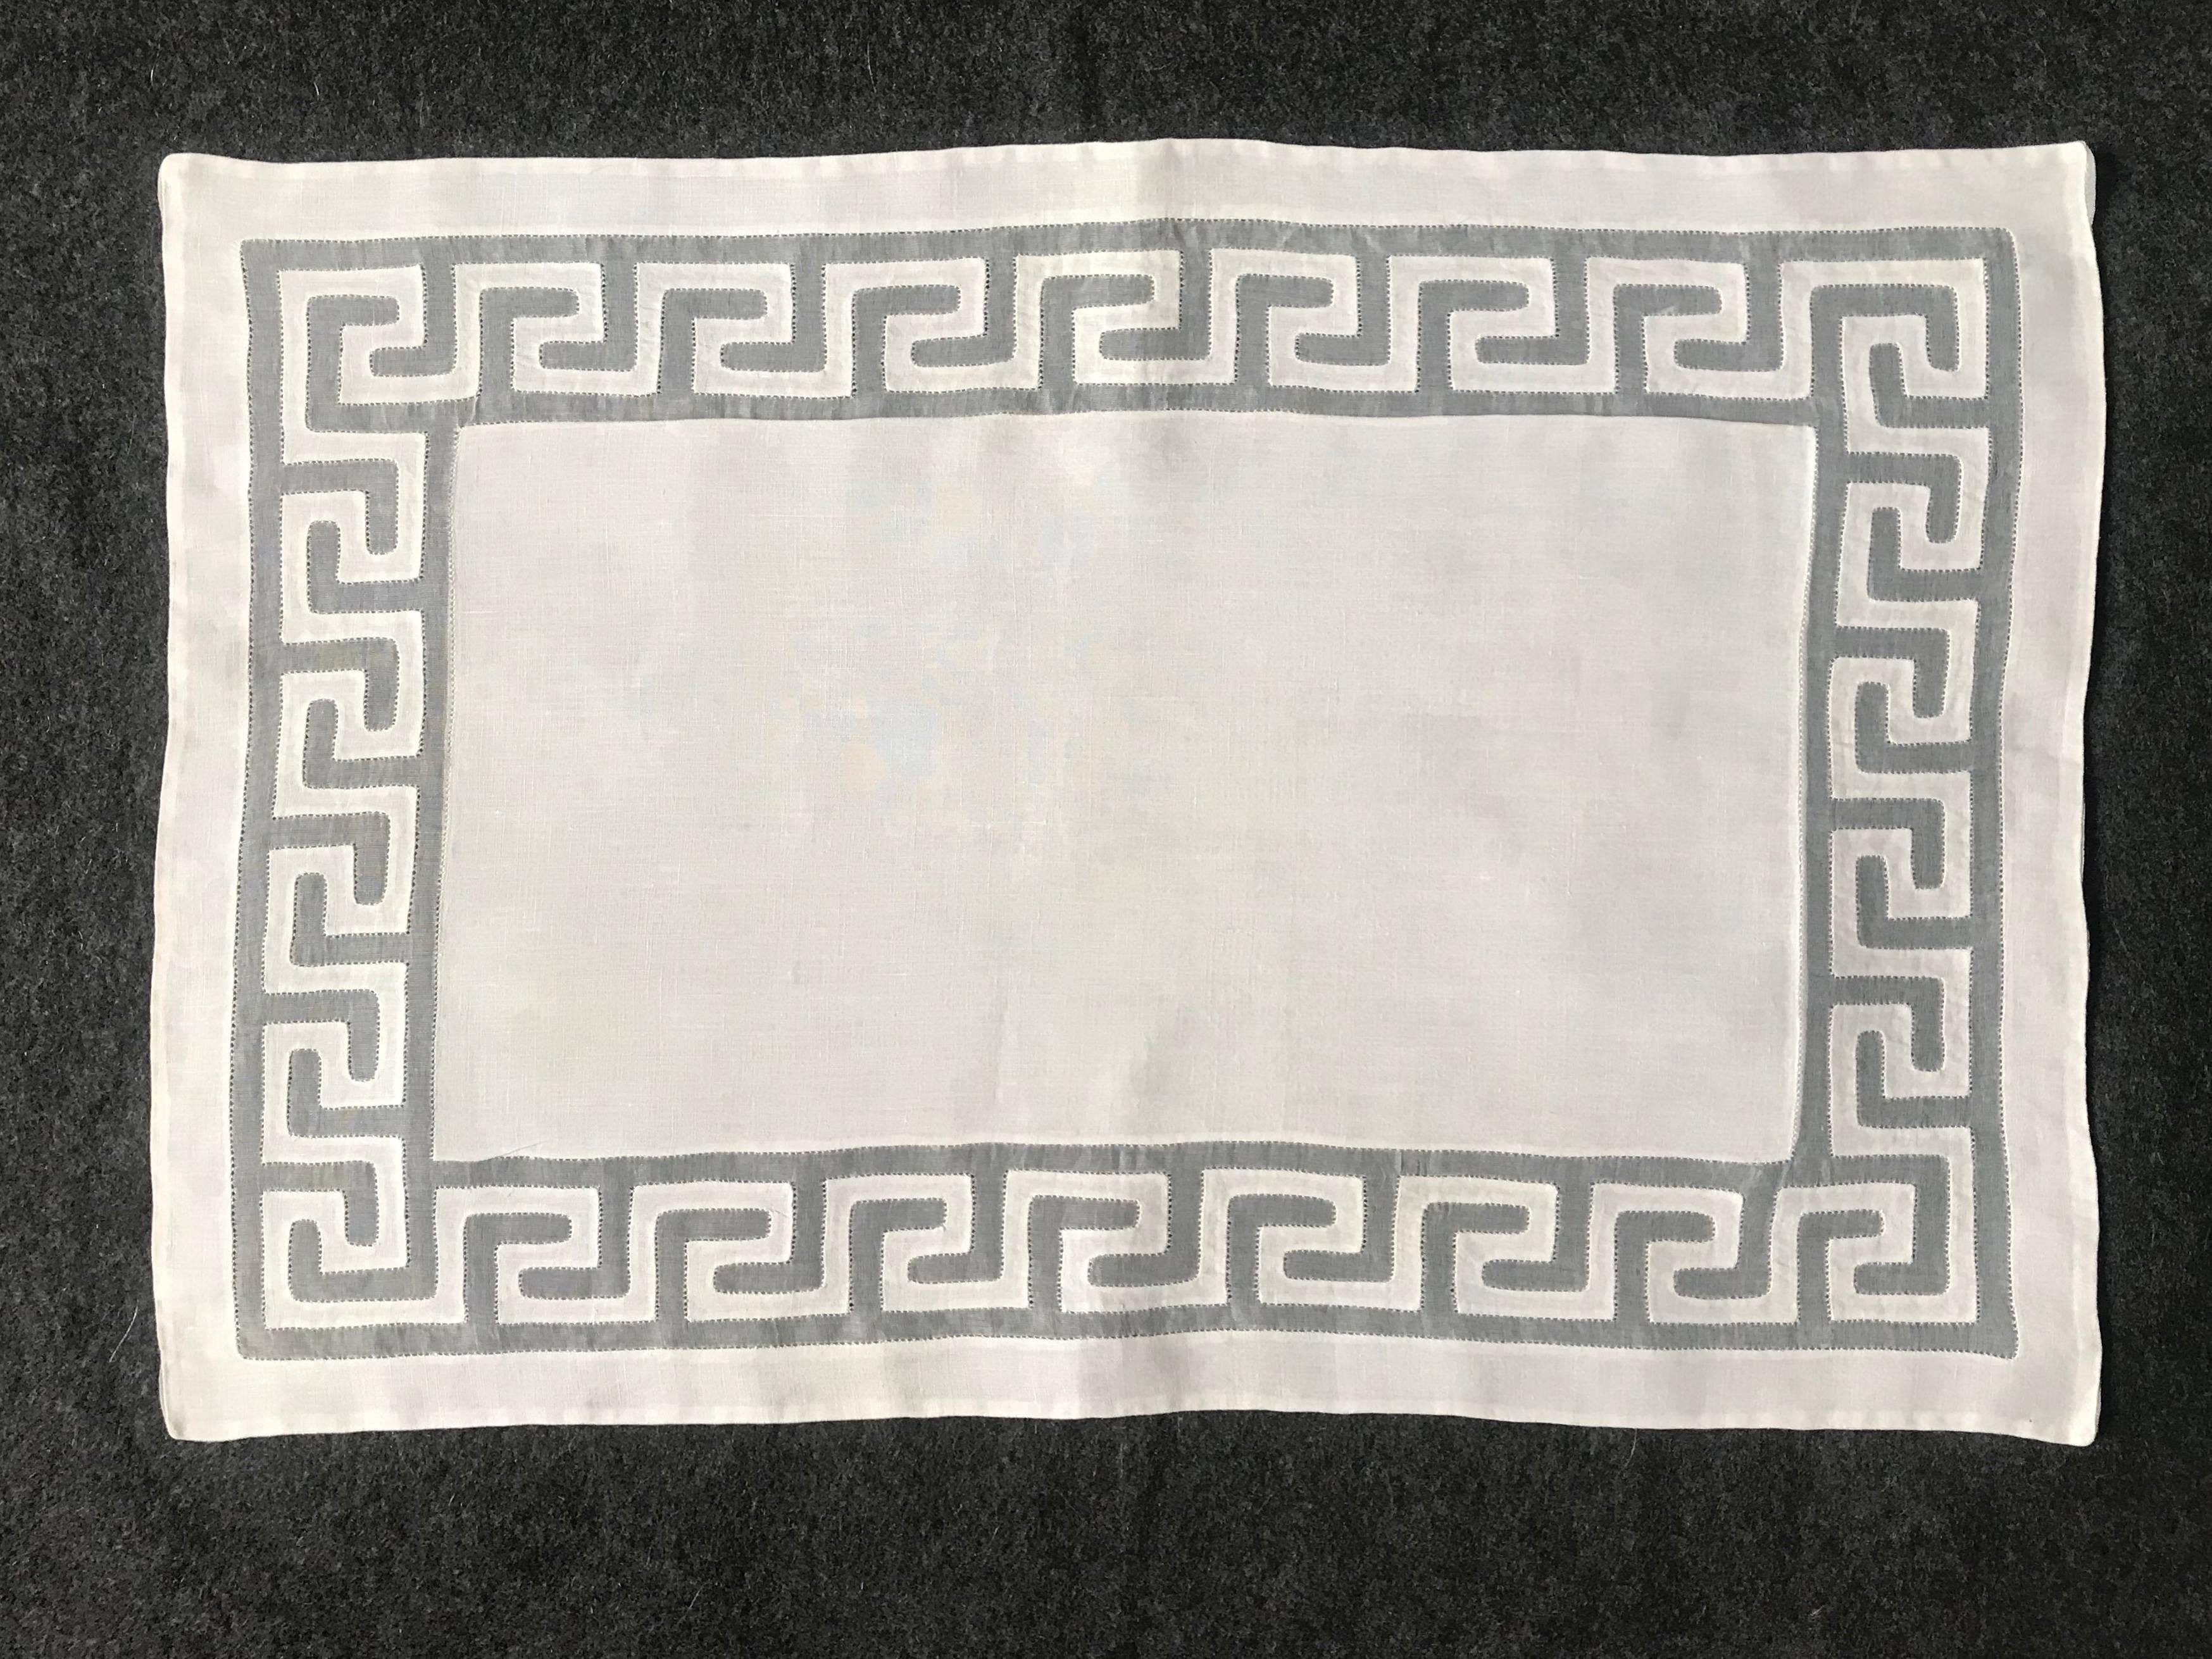 Set of six Greek key placemats and napkins. Vintage Greek key placemats with matching dinner napkins, 20th century.
Dimensions: Placemat 19